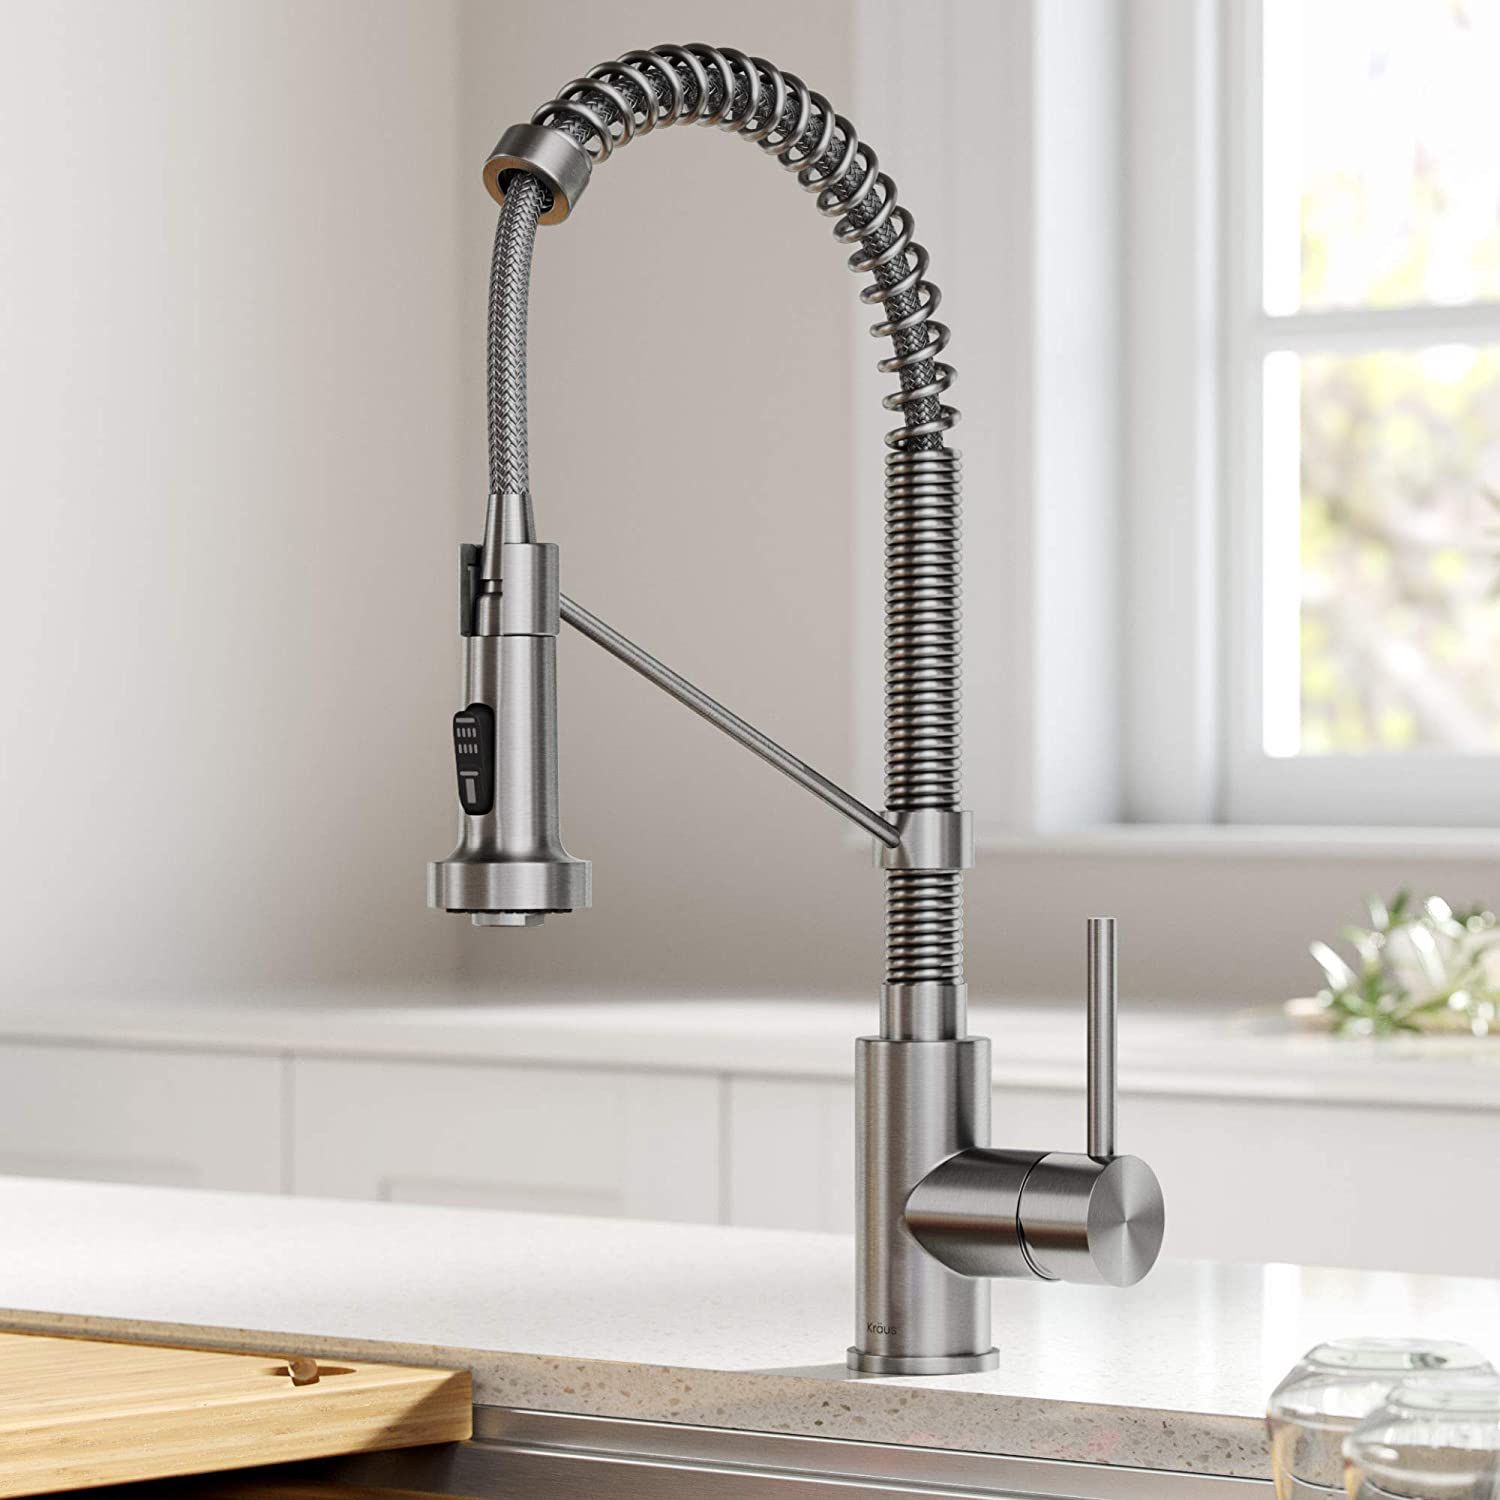 The 8 Best Touchless Kitchen Faucets For 2021 According To Reviews Better Homes Gardens